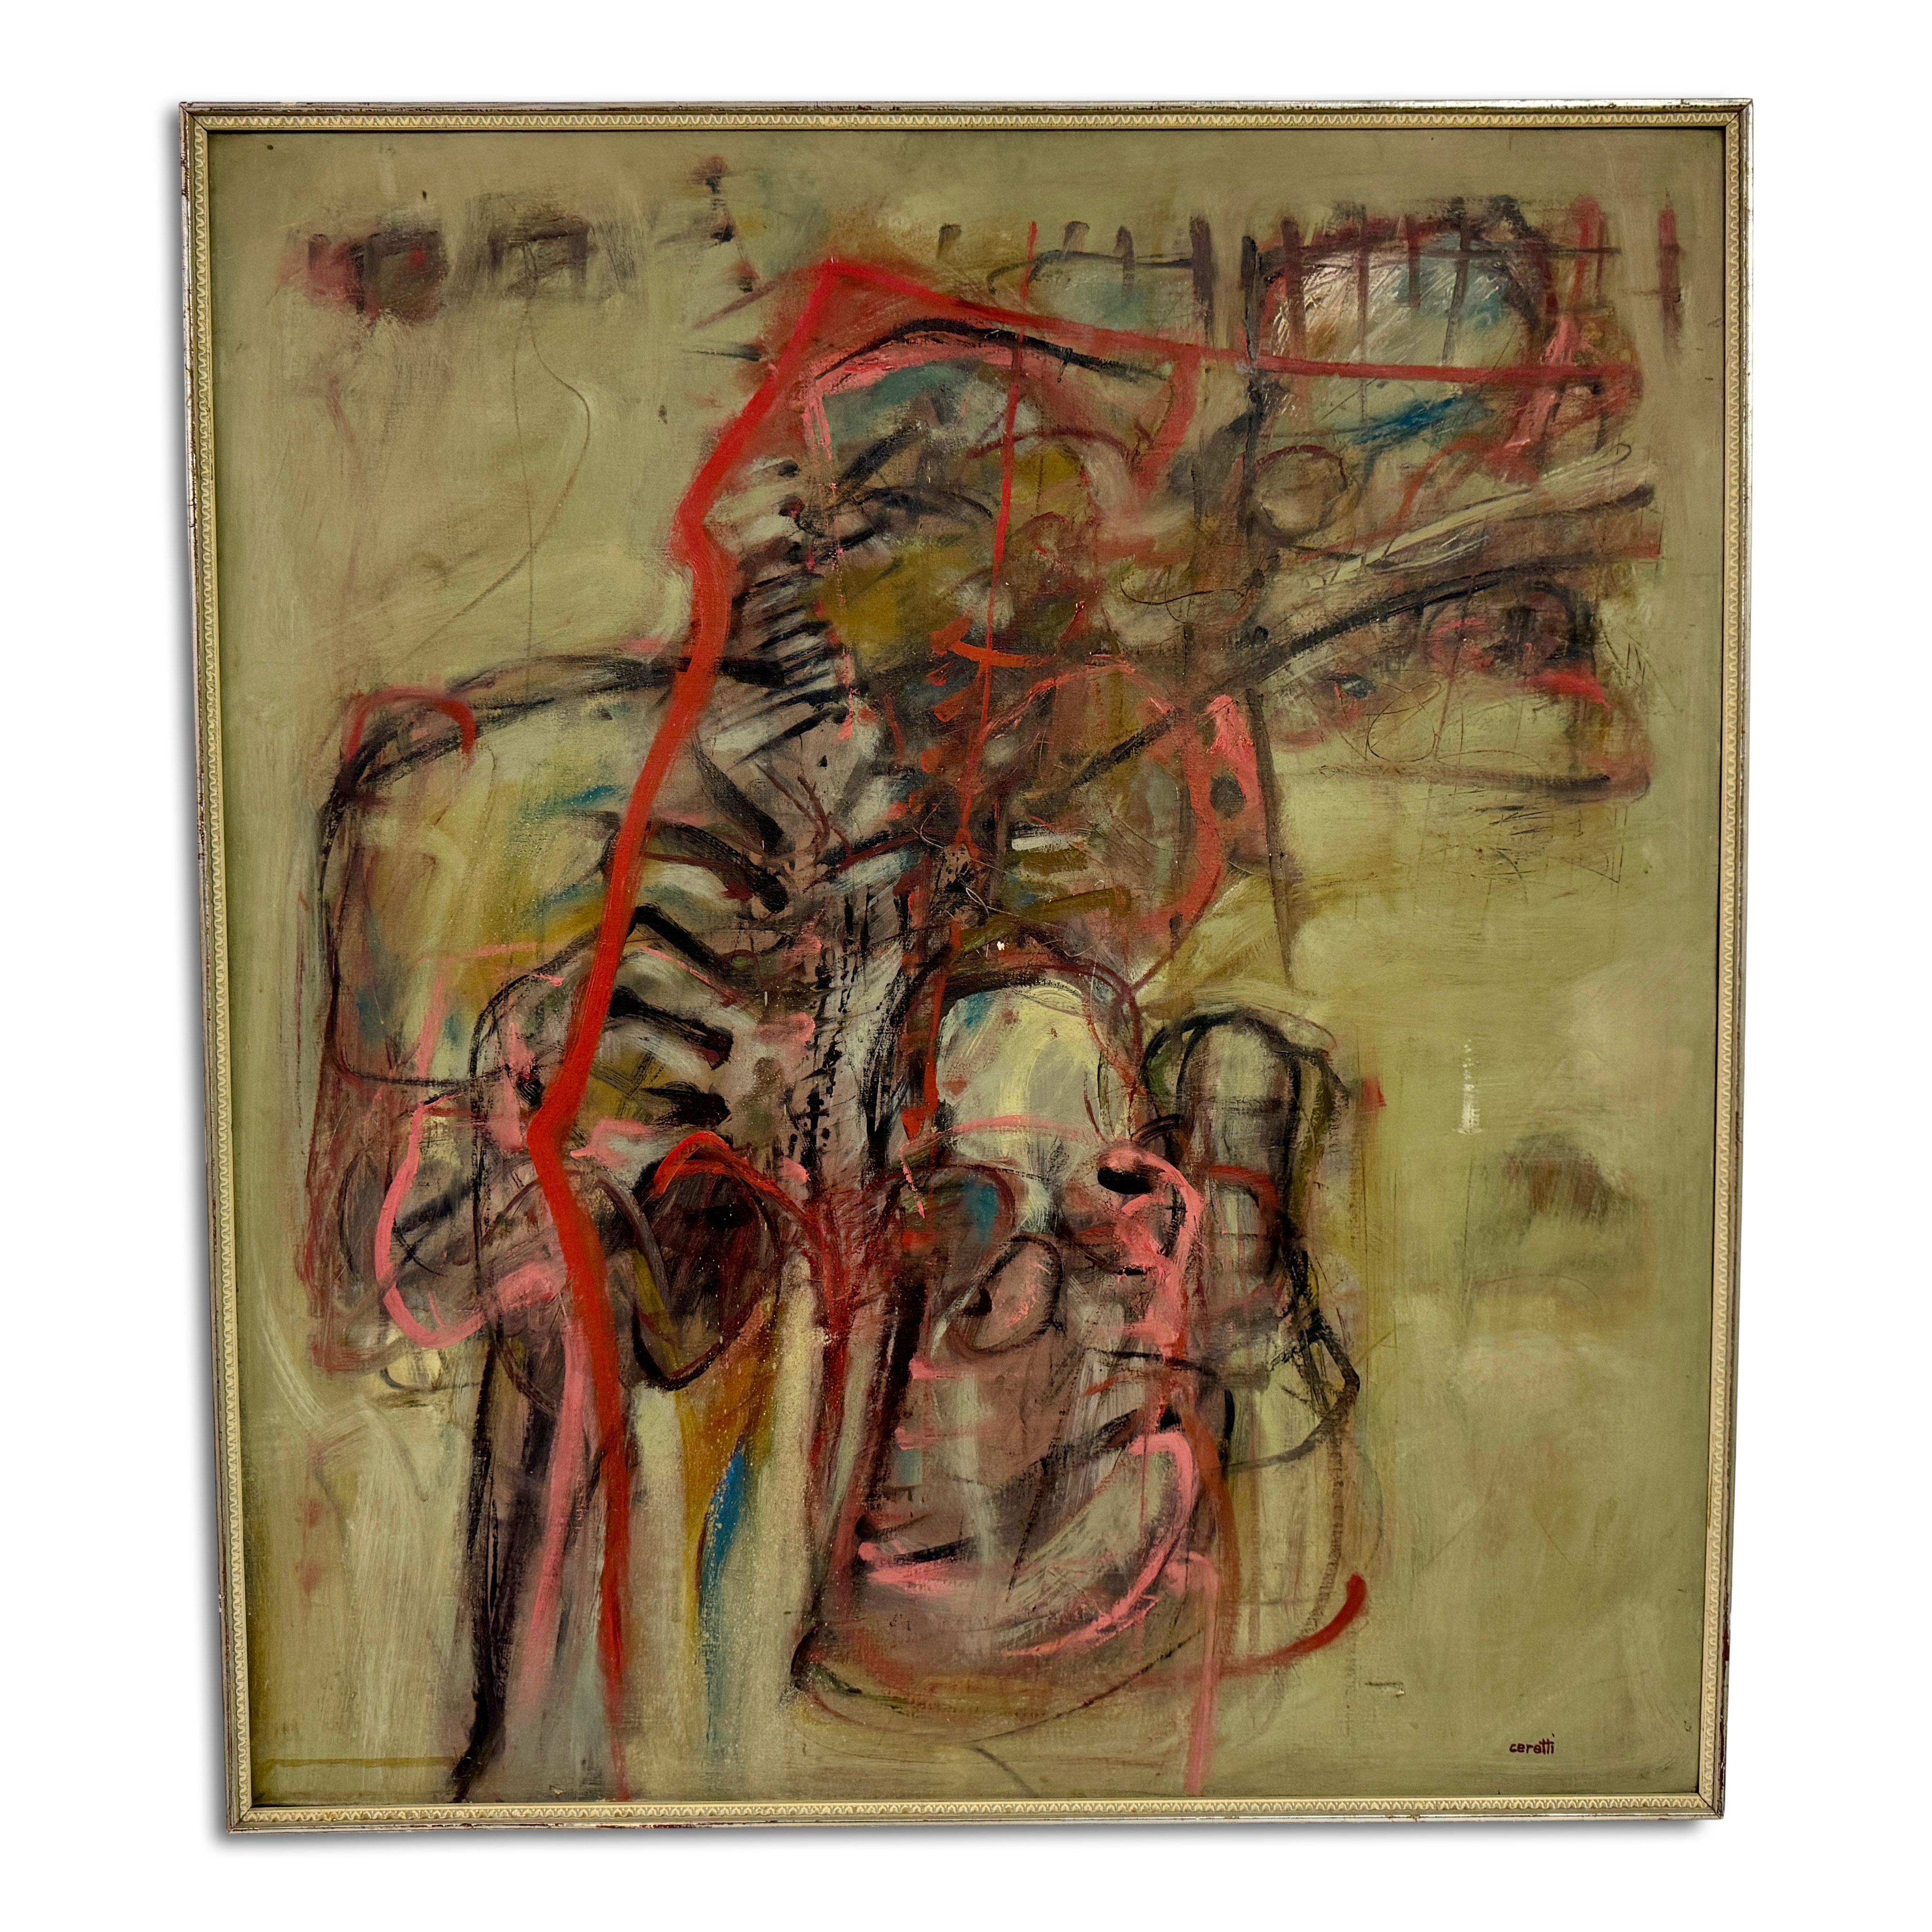 Abstract painting

By Mino Ceretti

Oil on canvas

Signed bottom right

Dated 1959 on reverse

A small tear near the signature, shown in the photos

Italy 1959
